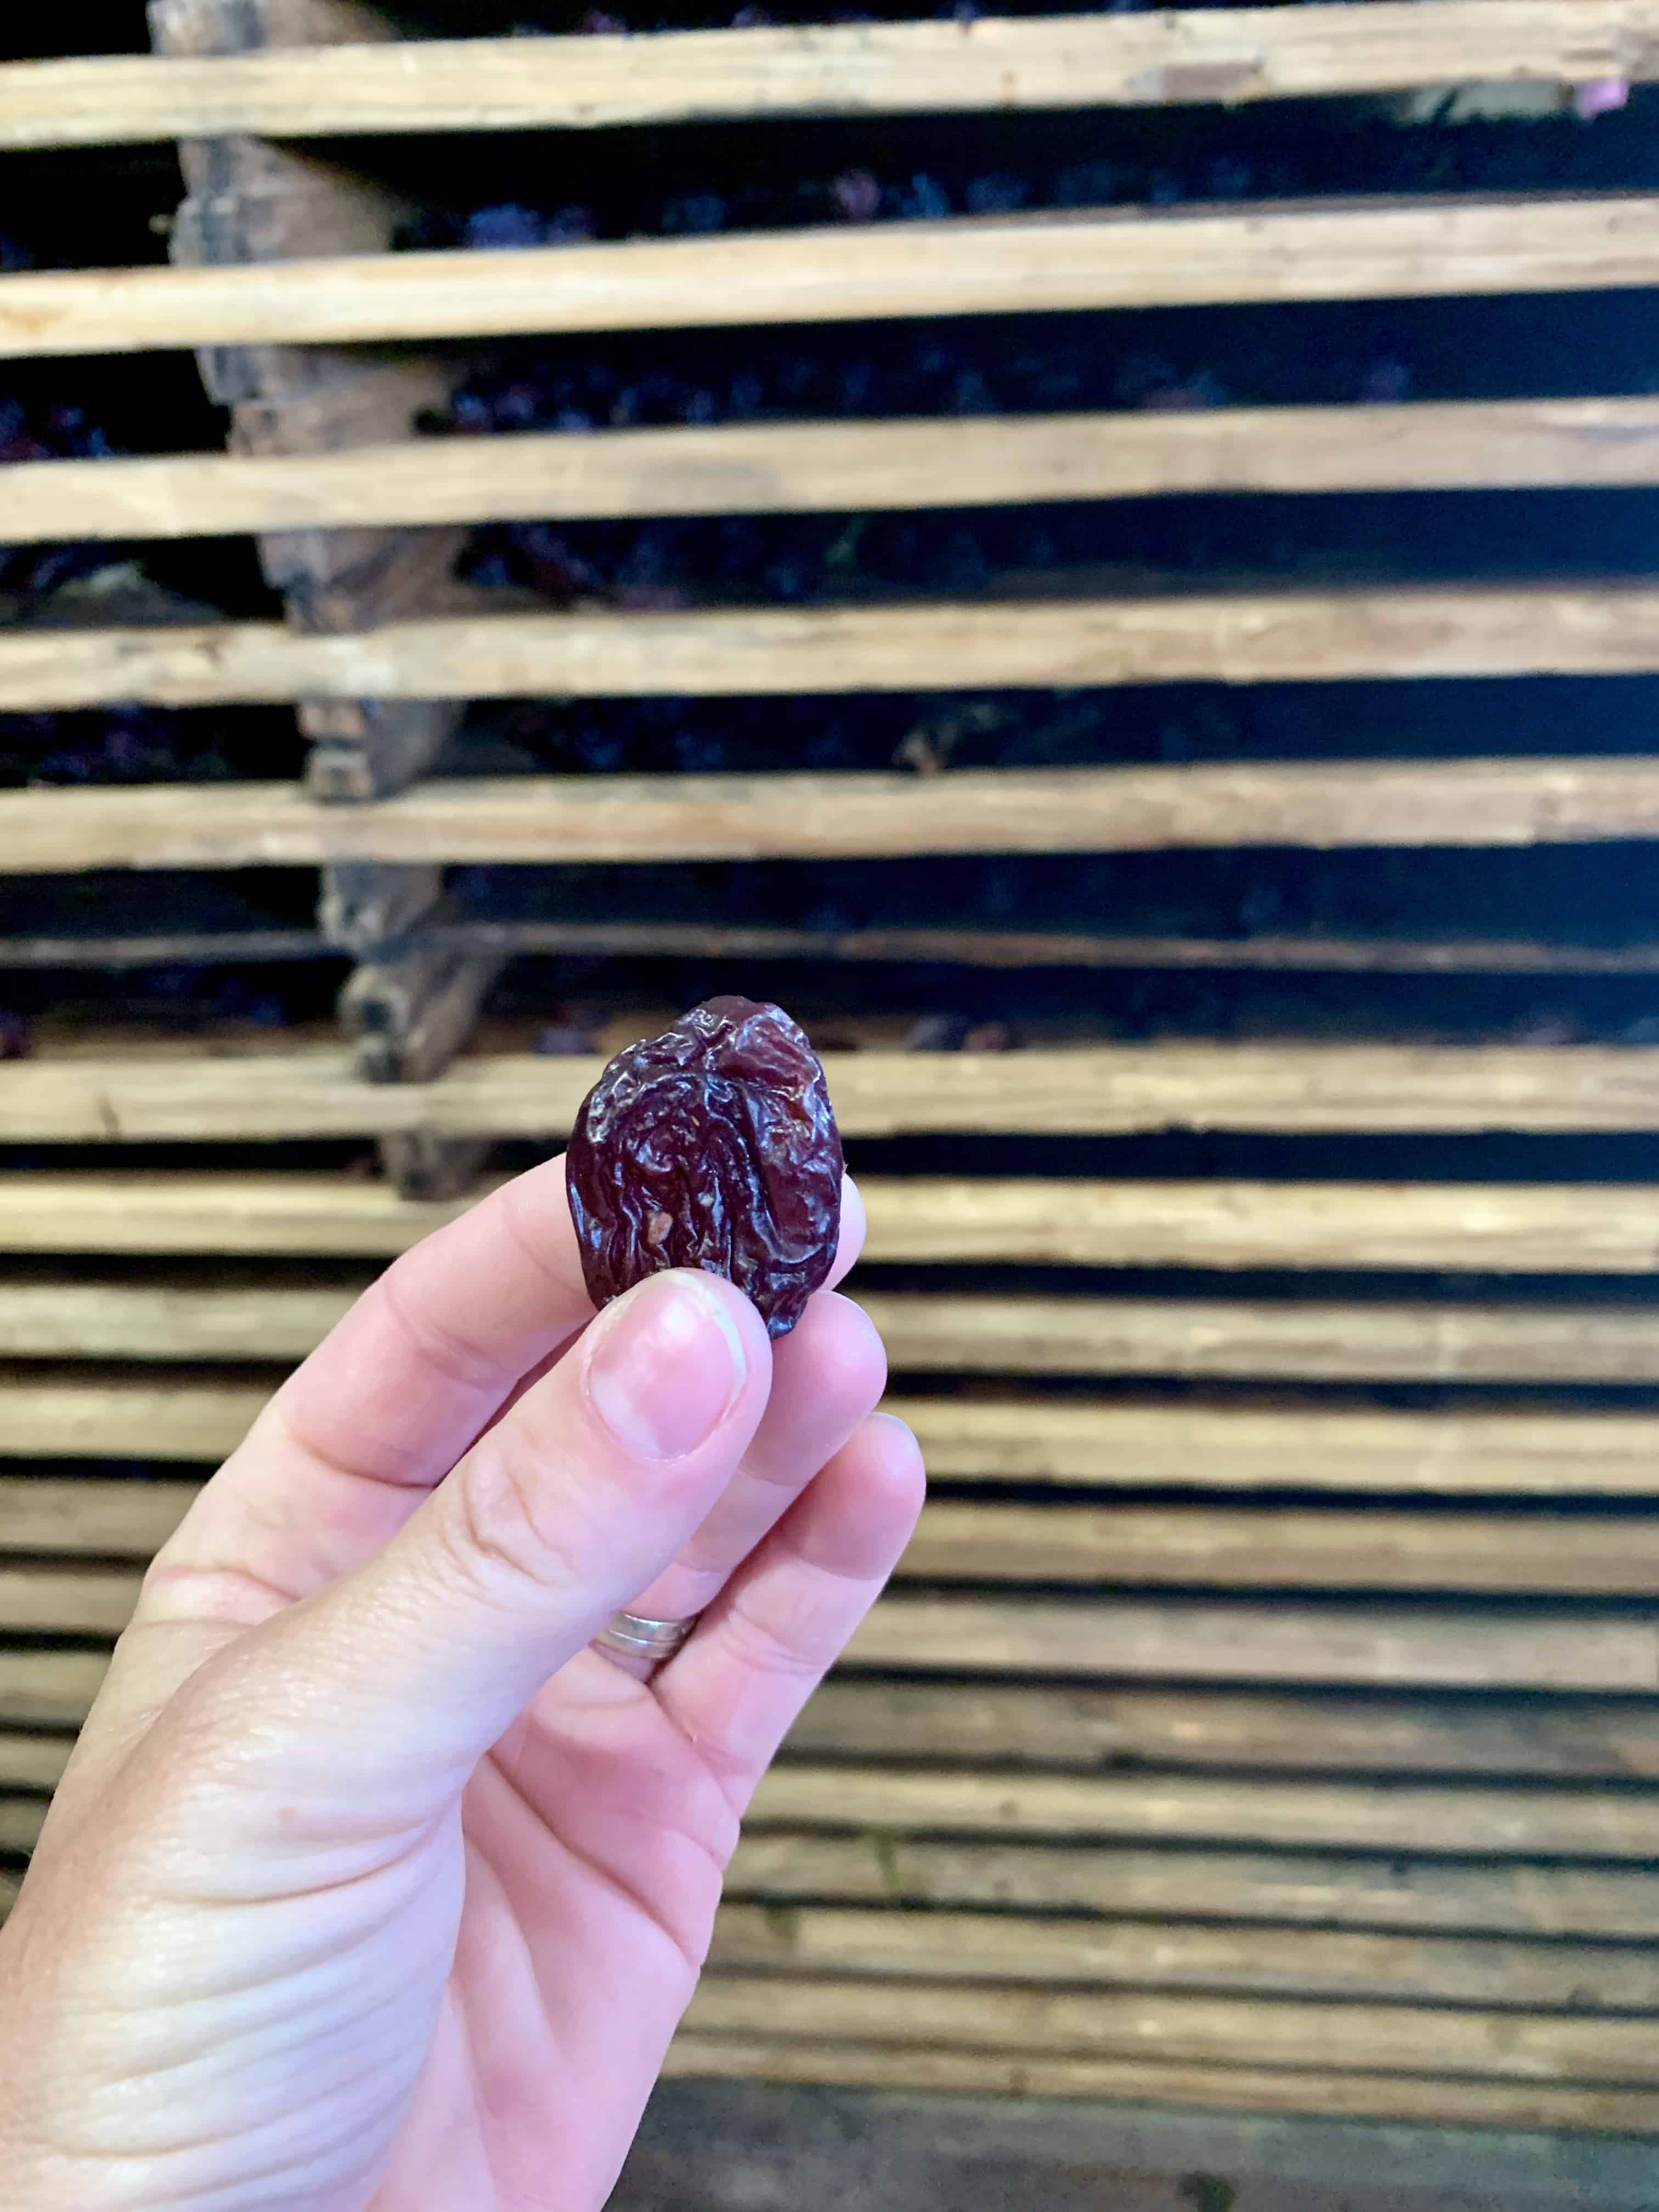 Close up photo of a hand holding a freshly dried prune.